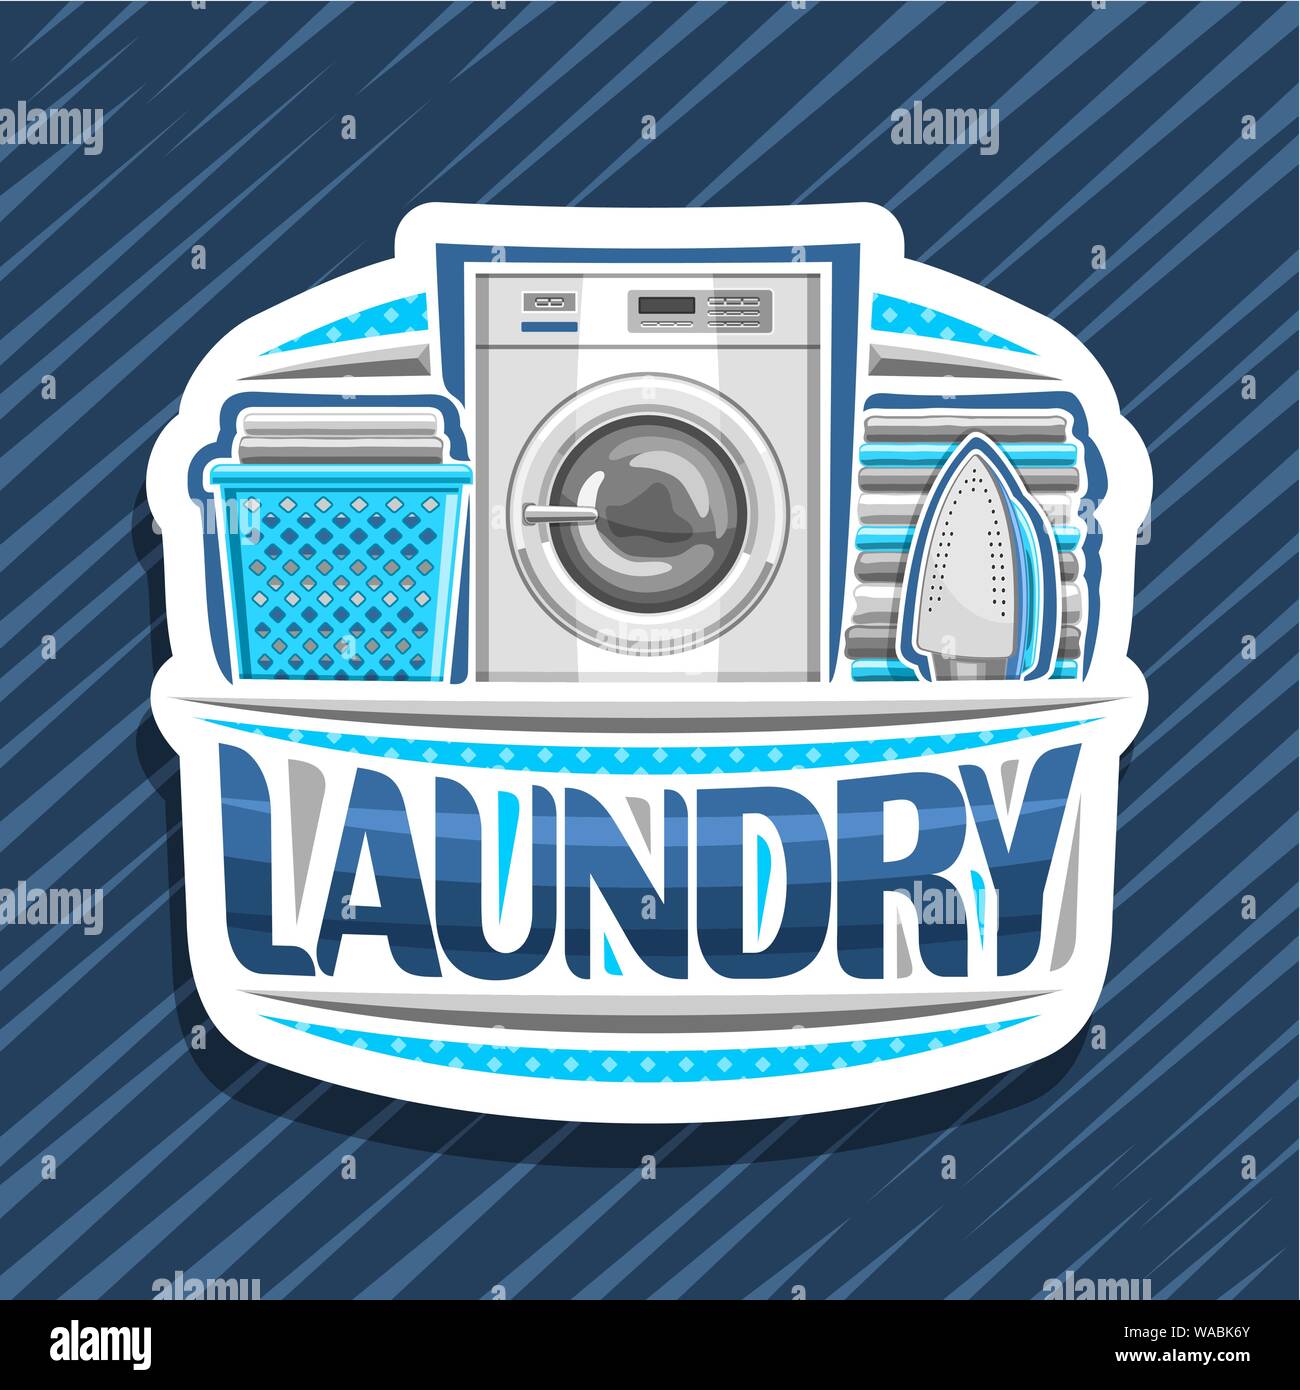 Vector logo for Laundry, white decorative signage with automatic washing machine, blue basket with linens, electric iron and stack of towels, original Stock Vector